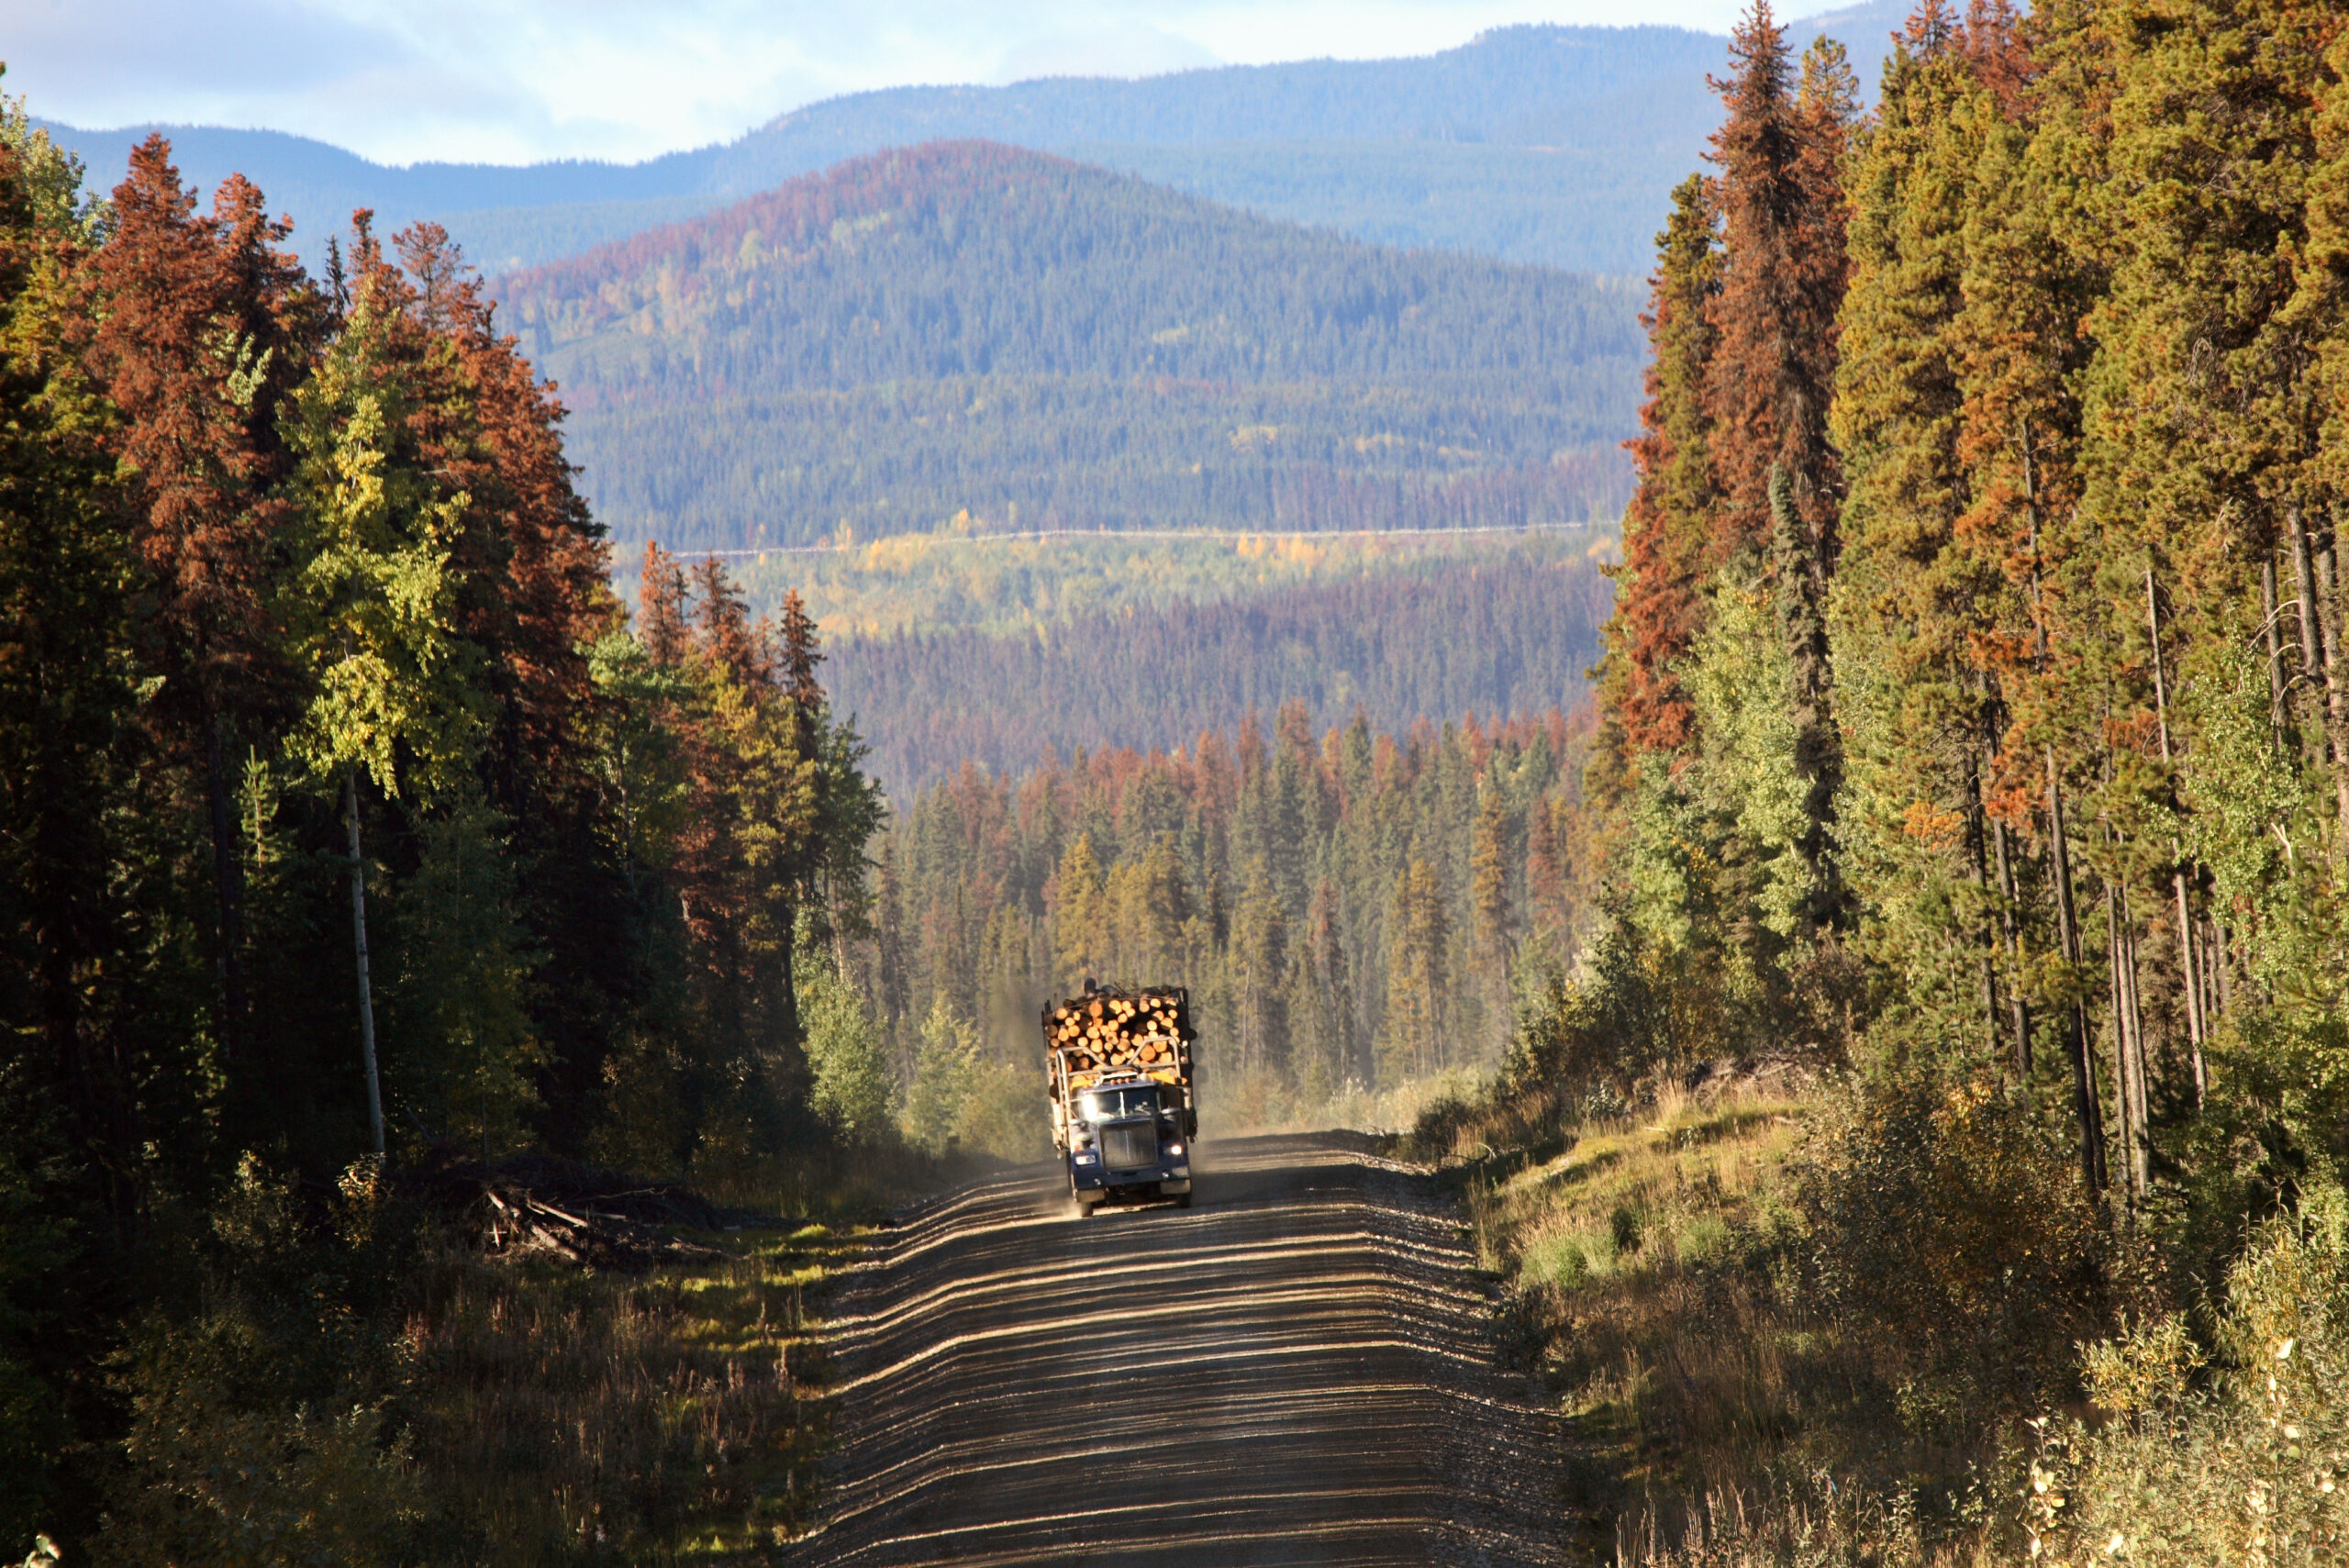 A logging truck driving through the beautiful scenery of British Columbia.